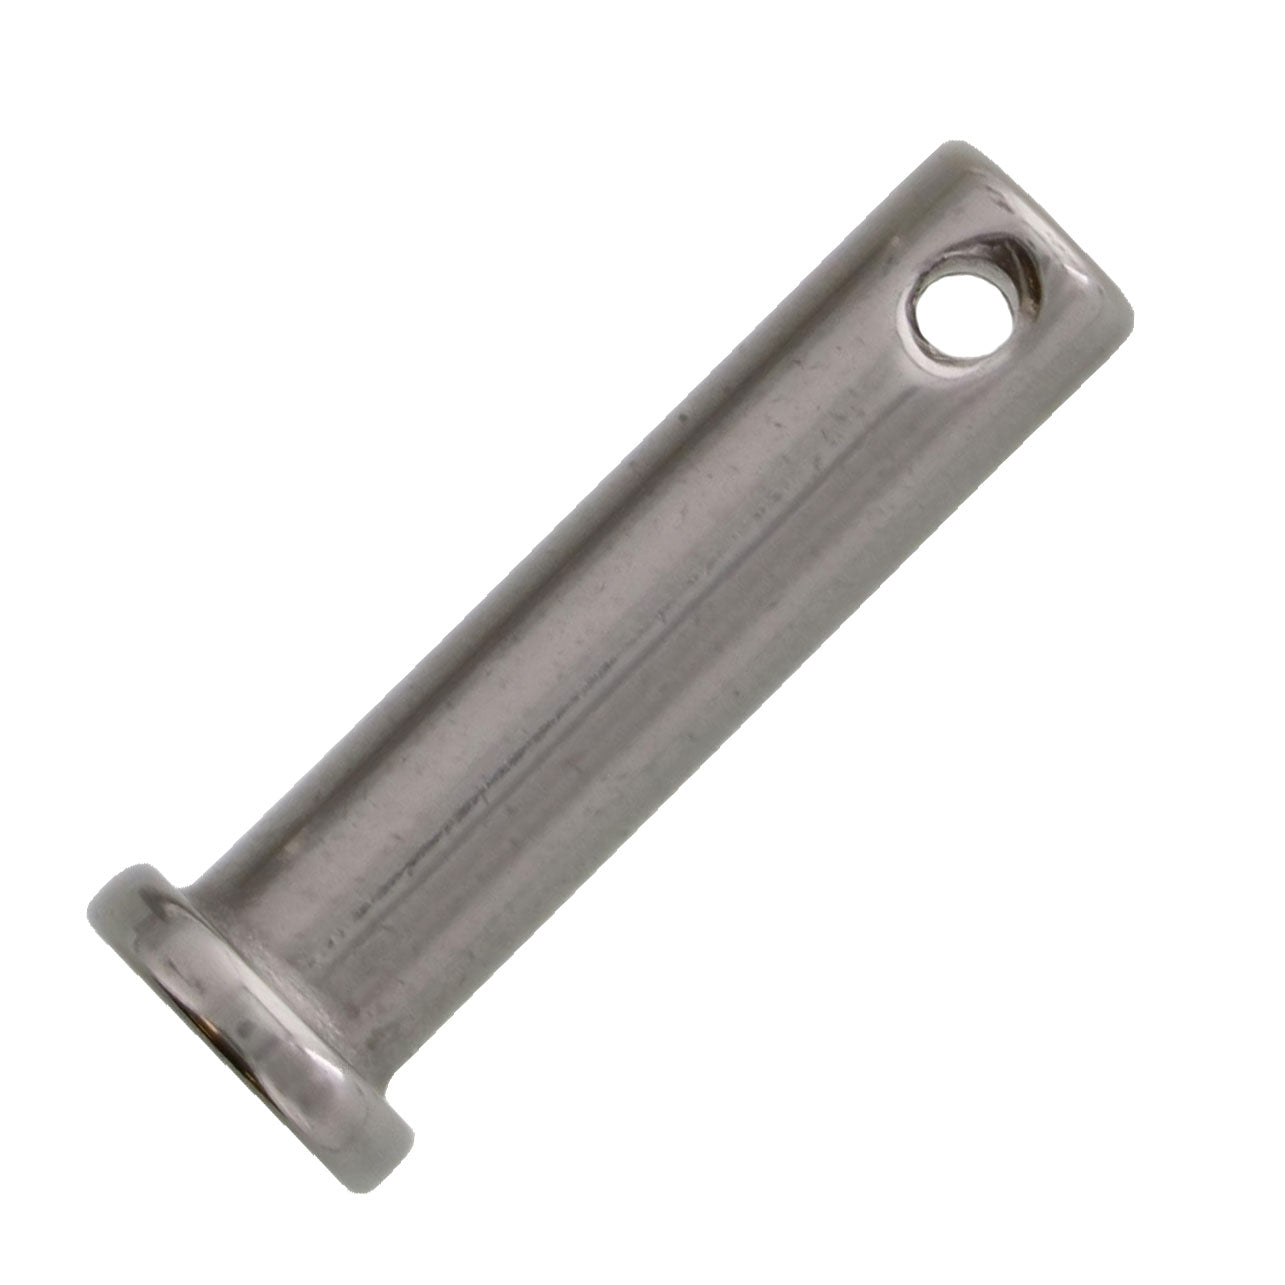 8mm x 25mm Stainless Steel Clevis Pin